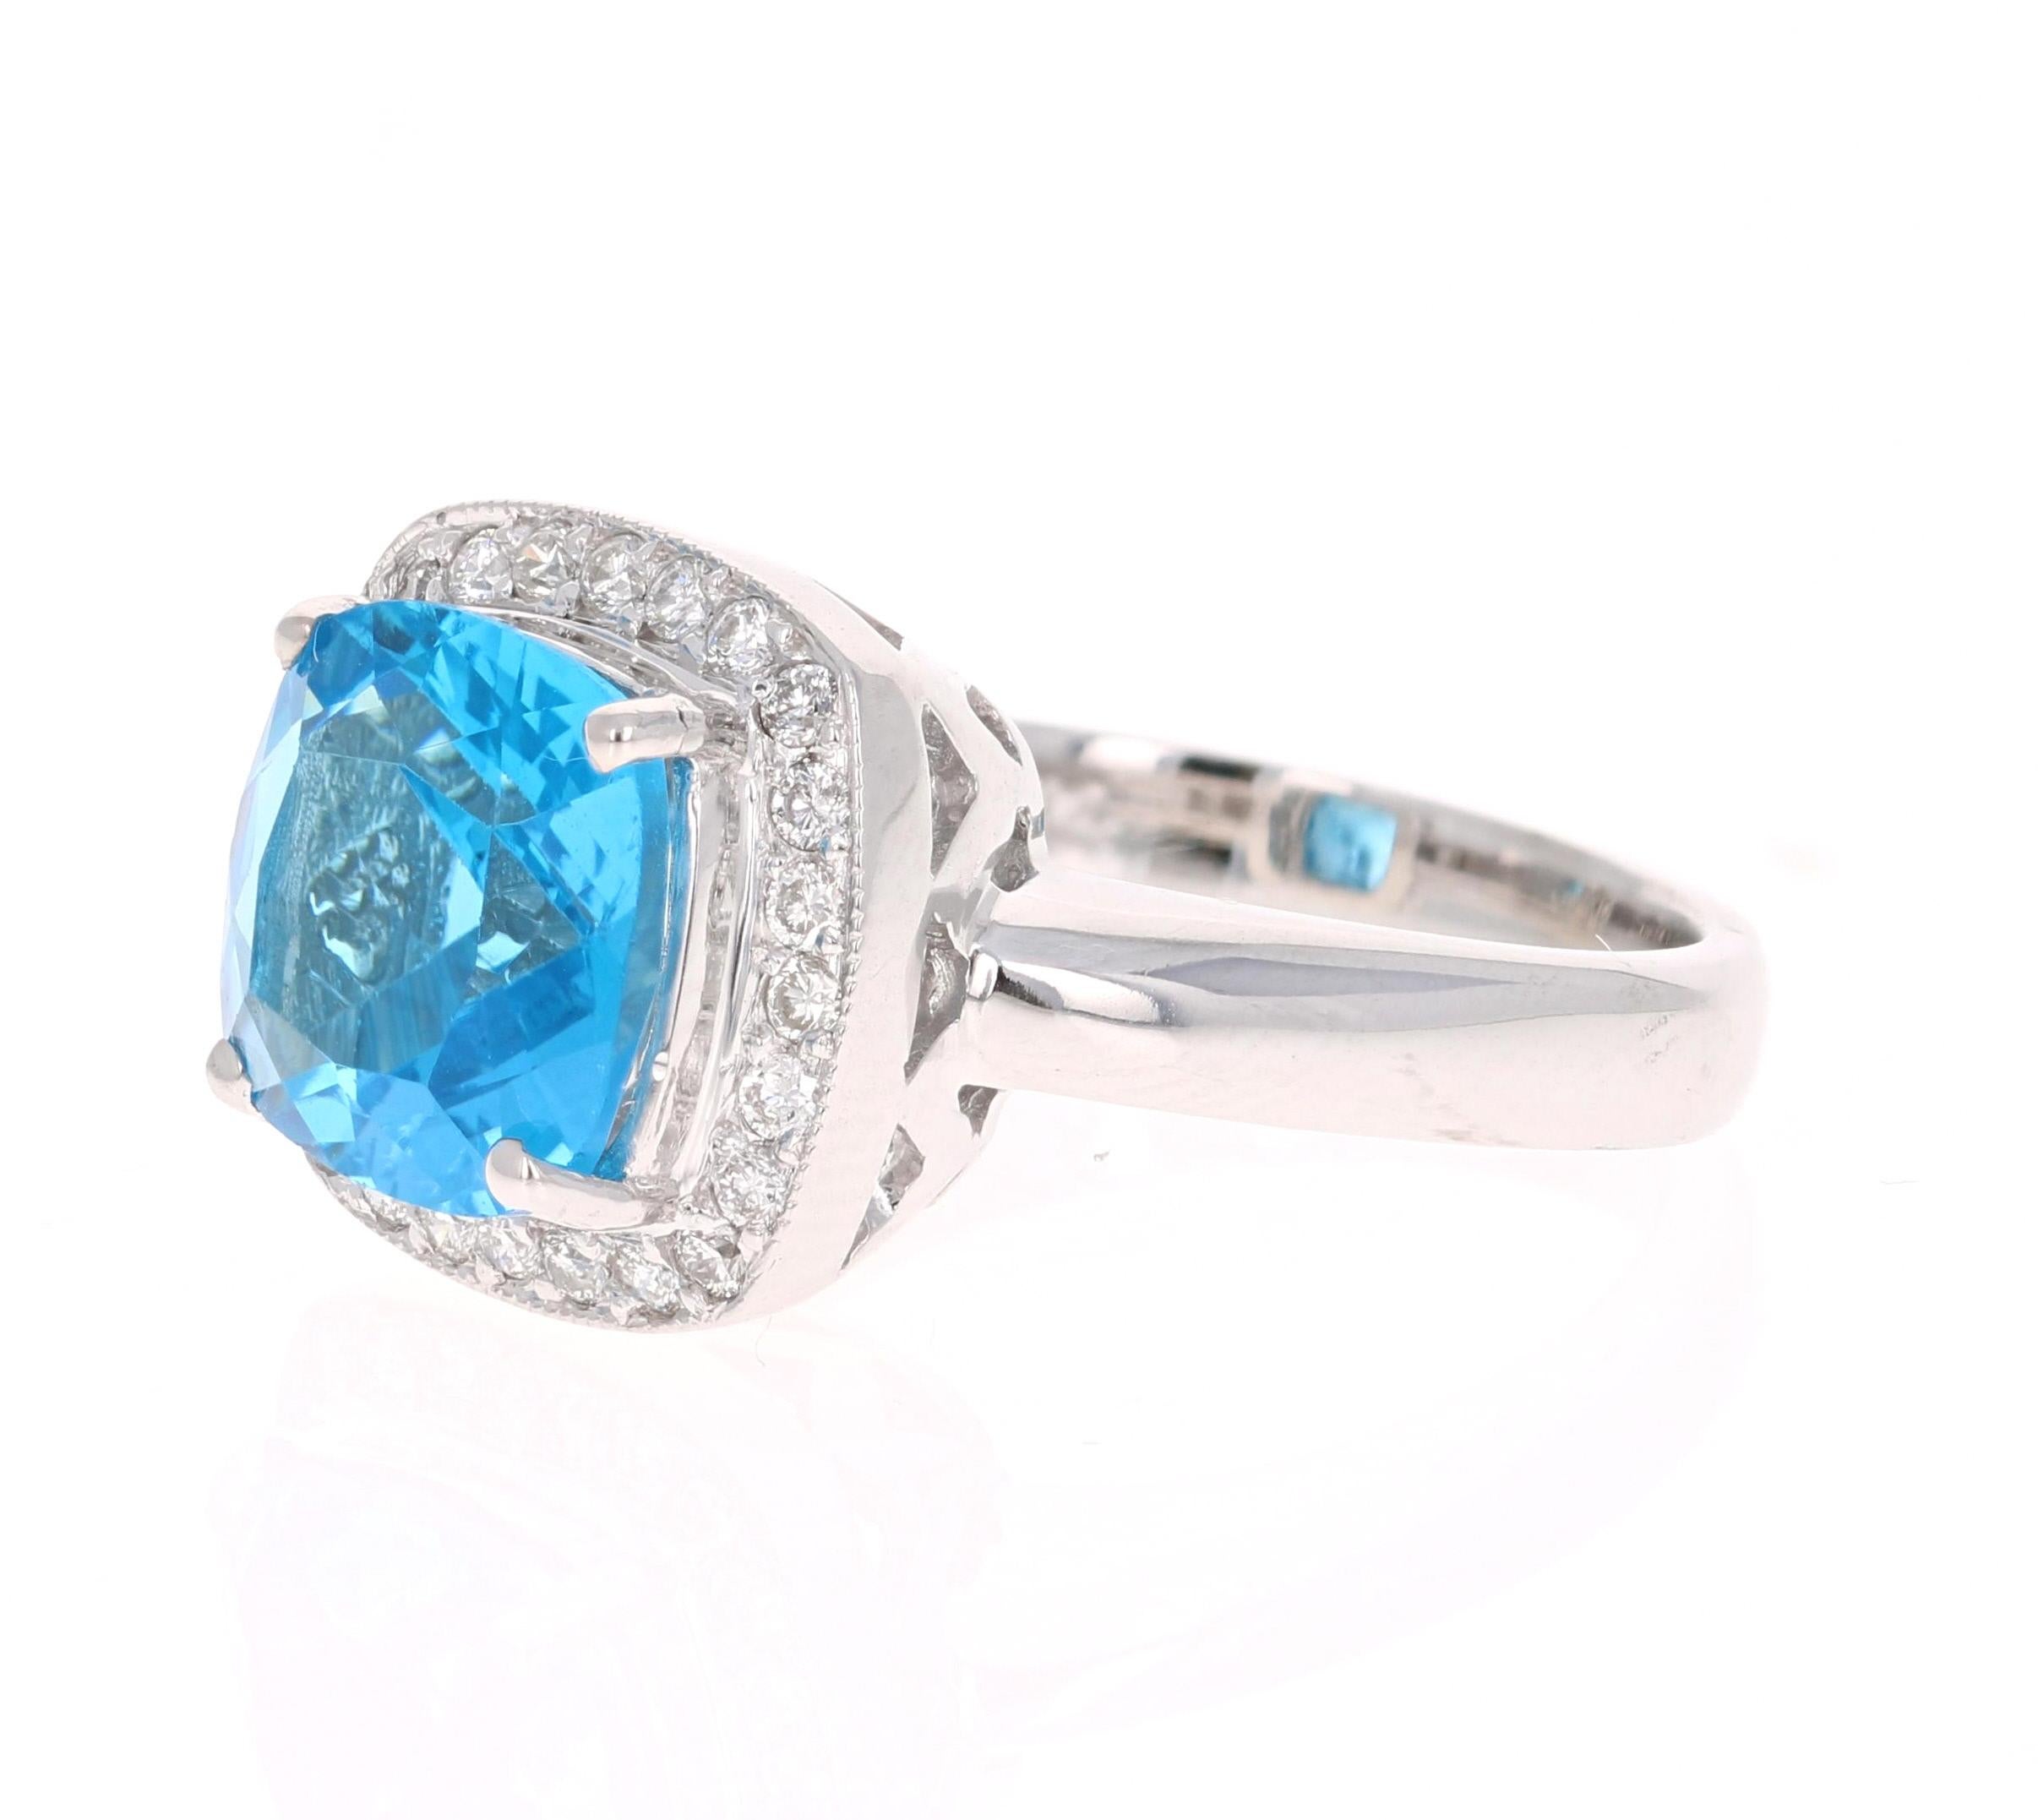 Contemporary 5.29 Carat Blue Topaz Diamond White Gold Cocktail Ring For Sale